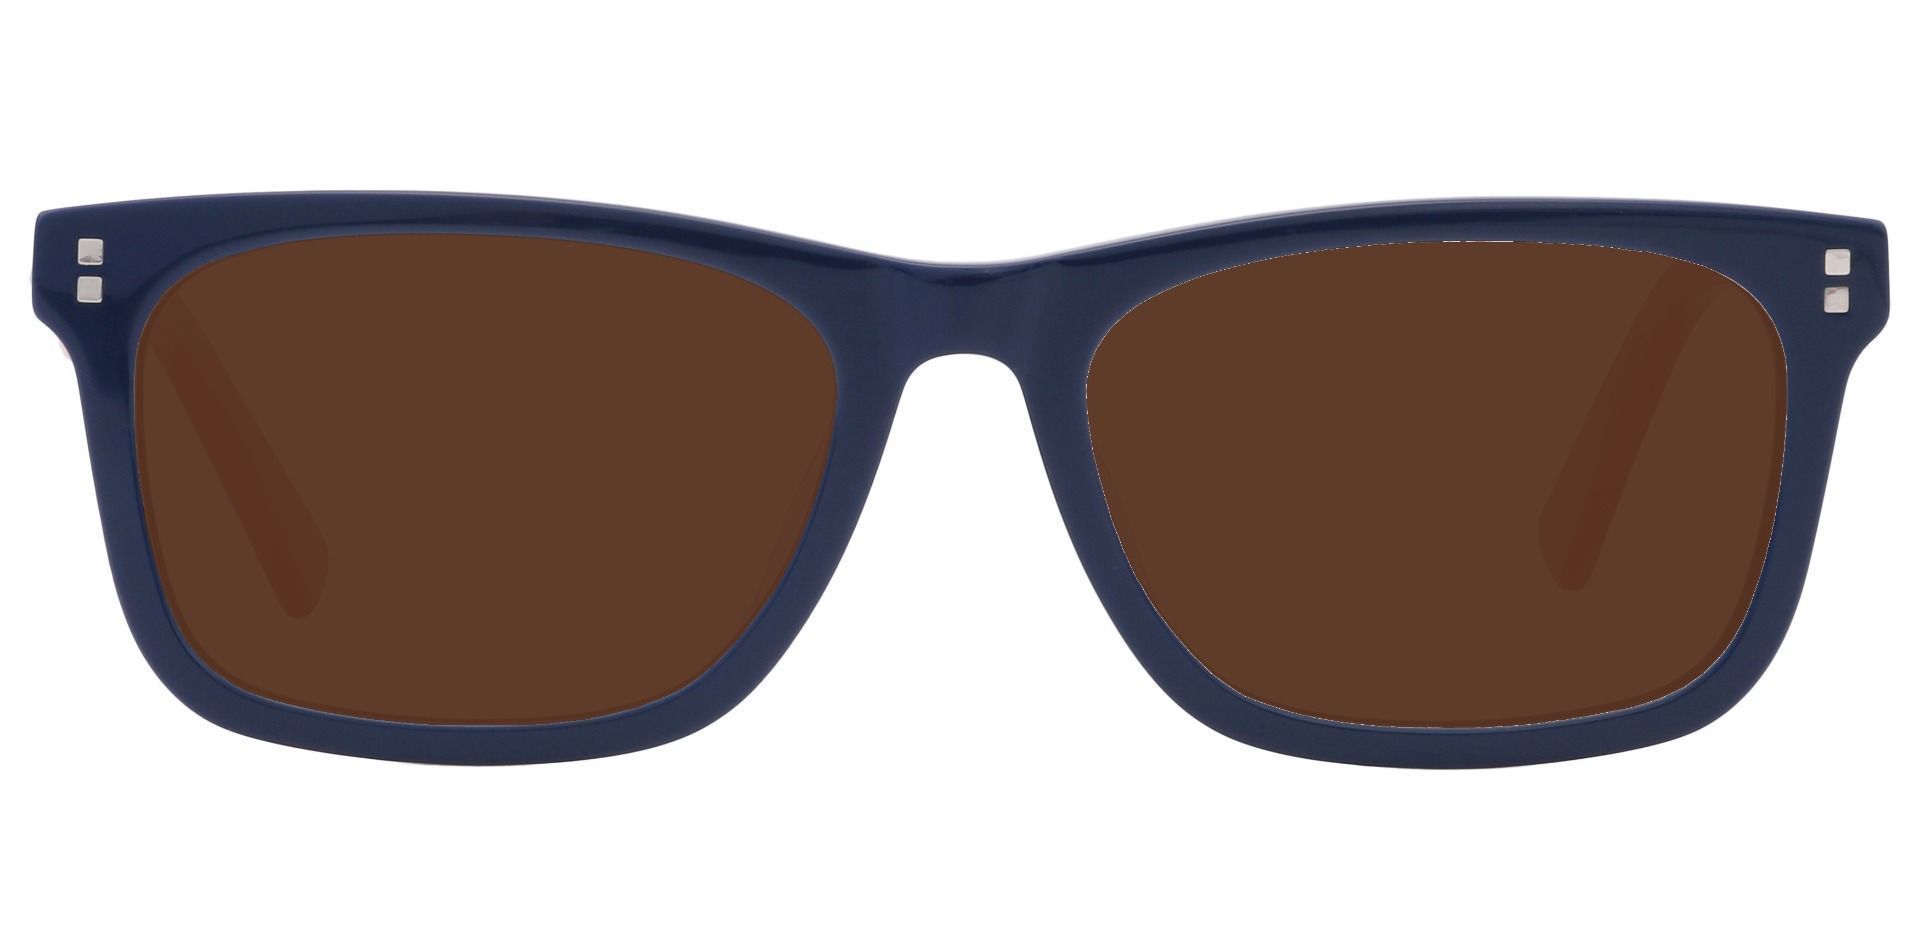 Newbury Rectangle Lined Bifocal Sunglasses - Blue Frame With Brown Lenses